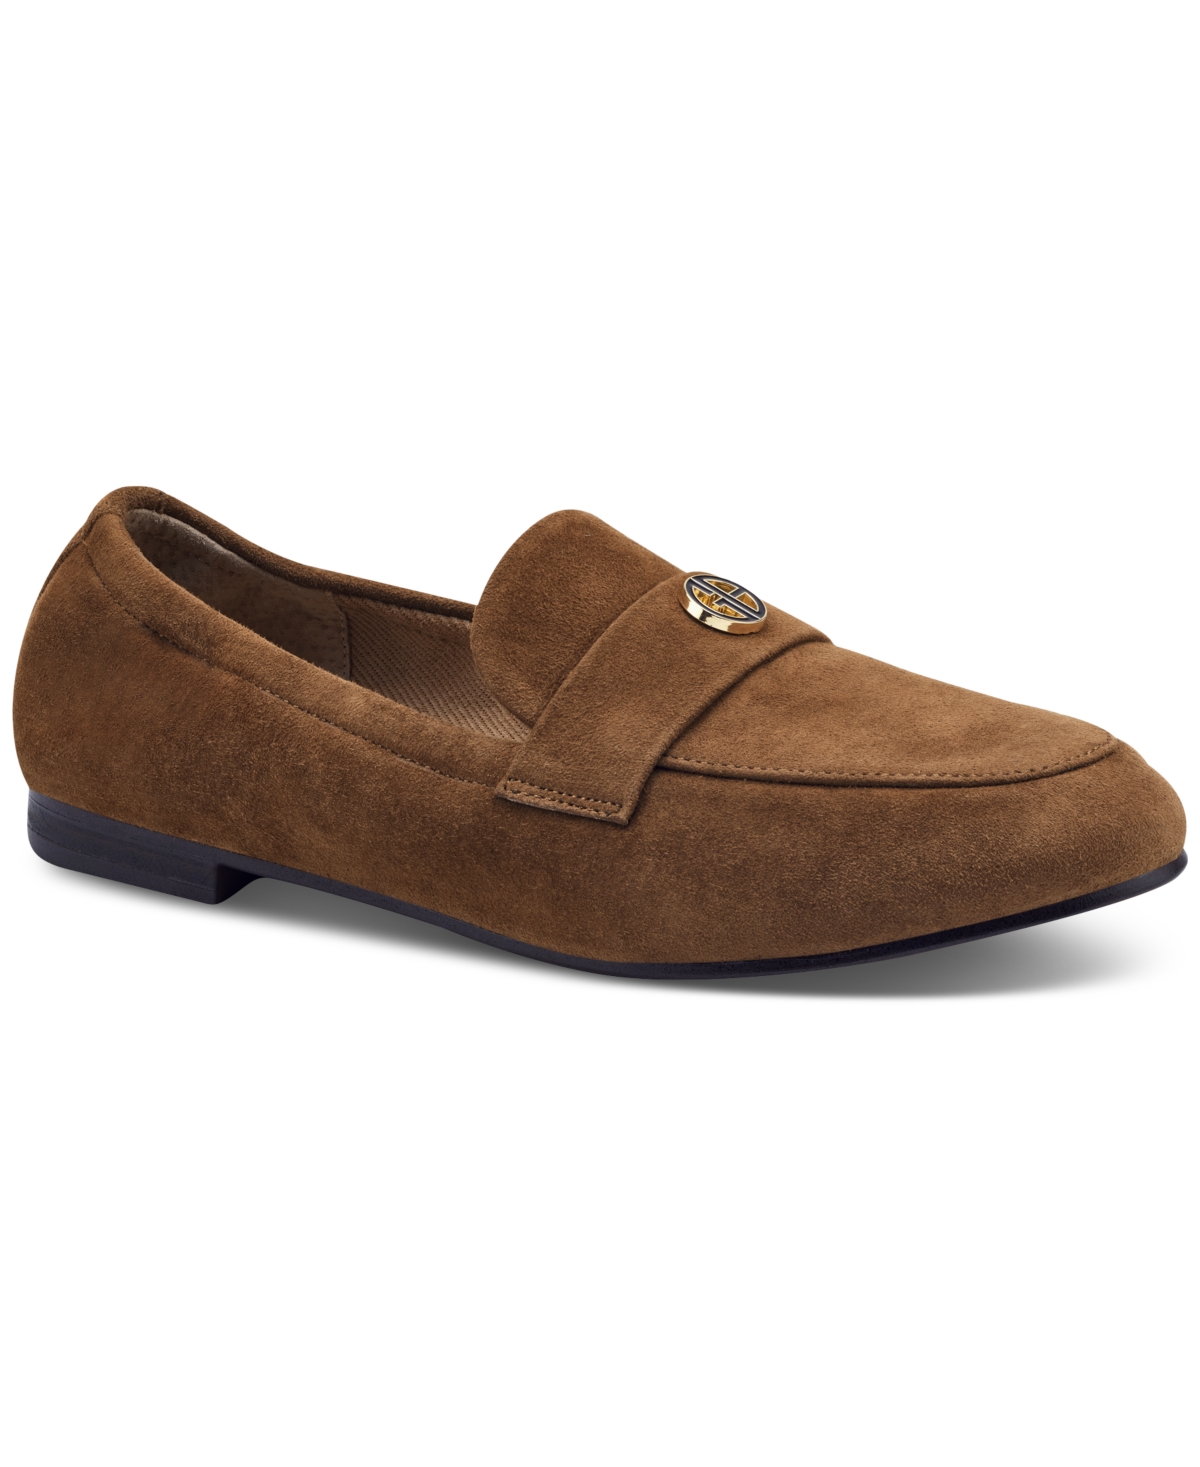 Trinaa Ruched Slip-On Loafer Flats, Created for Macy's - Mocha Suede